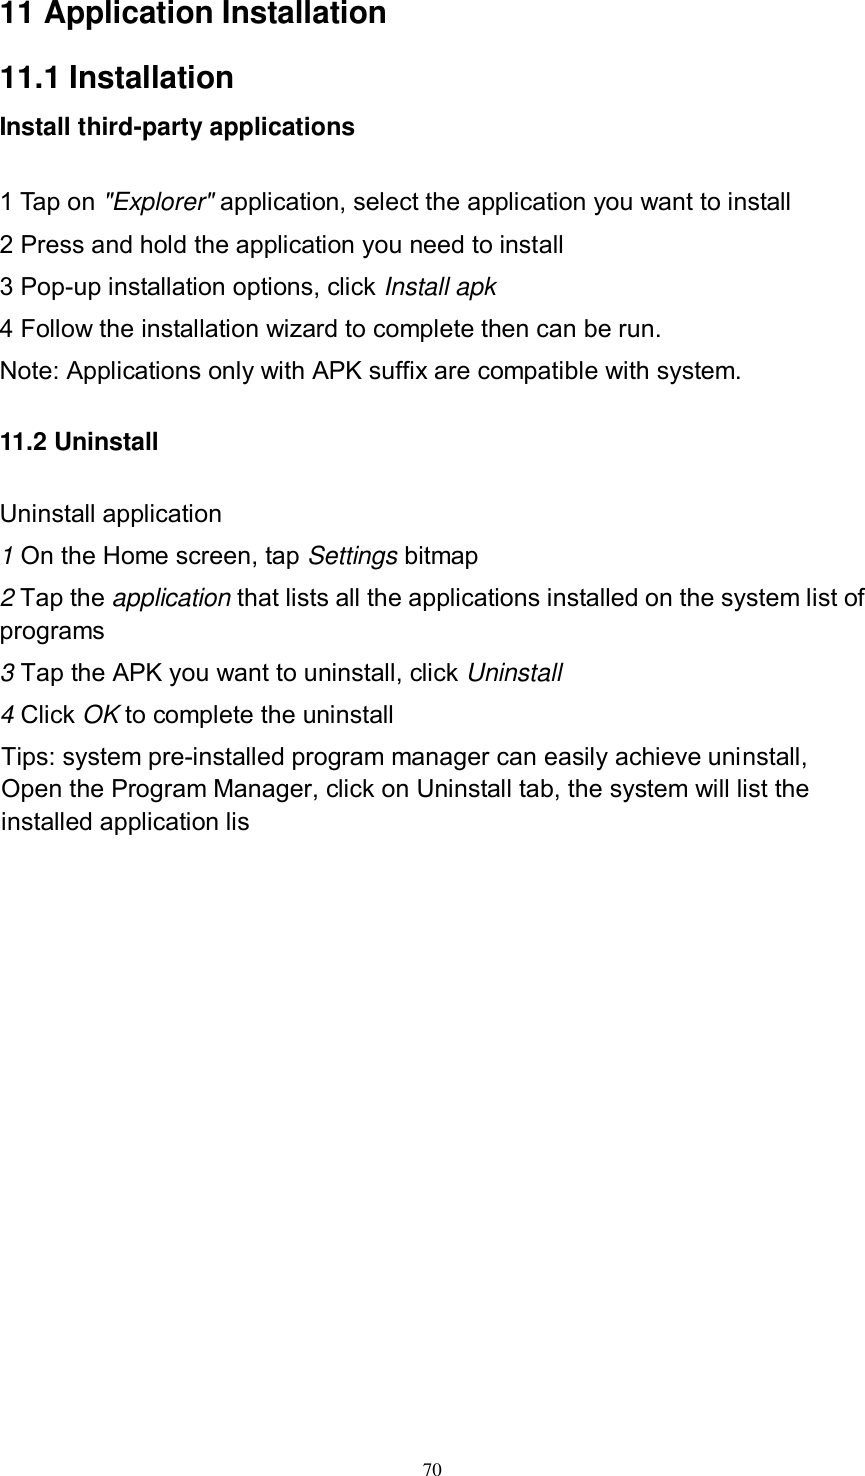      70 11 Application Installation 11.1 Installation Install third-party applications        1 Tap on &quot;Explorer&quot; application, select the application you want to install 2 Press and hold the application you need to install 3 Pop-up installation options, click Install apk 4 Follow the installation wizard to complete then can be run. Note: Applications only with APK suffix are compatible with system. 11.2 Uninstall Uninstall application 1 On the Home screen, tap Settings bitmap 2 Tap the application that lists all the applications installed on the system list of programs 3 Tap the APK you want to uninstall, click Uninstall 4 Click OK to complete the uninstall Tips: system pre-installed program manager can easily achieve uninstall, Open the Program Manager, click on Uninstall tab, the system will list the installed application lis           